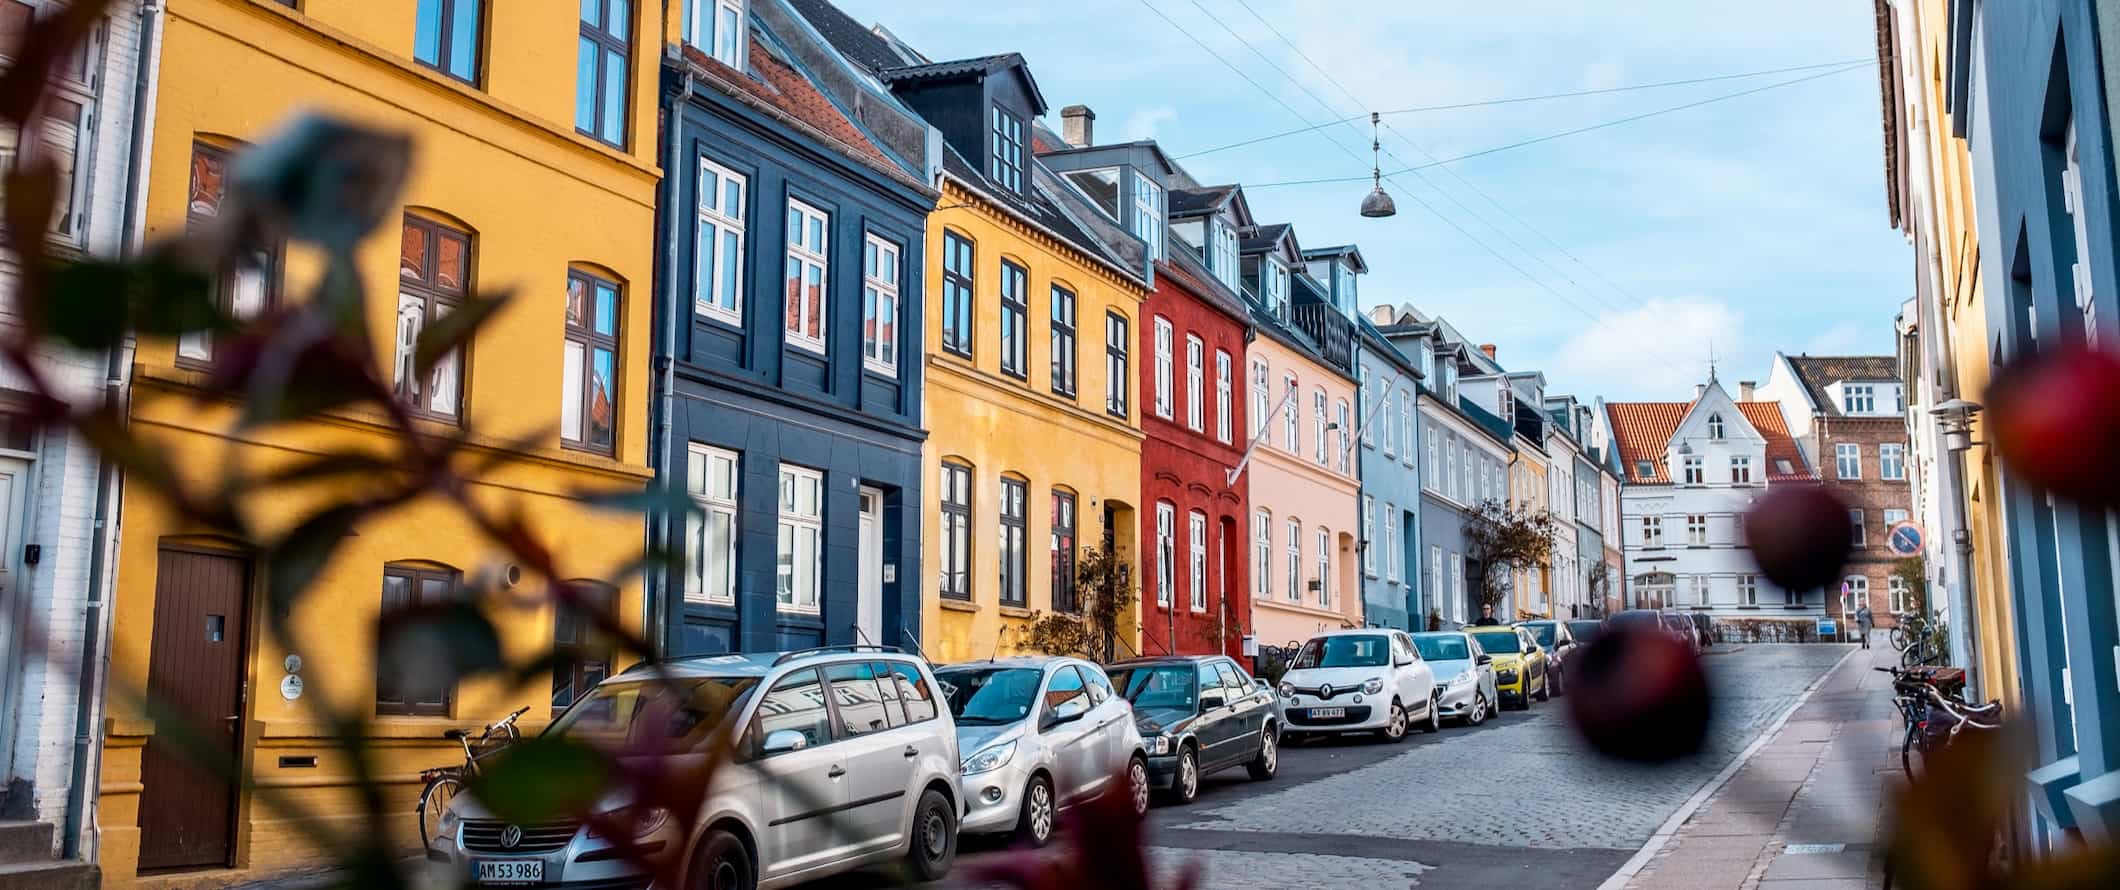 Colorful homes on a quiet street in Aarhus, Denmark